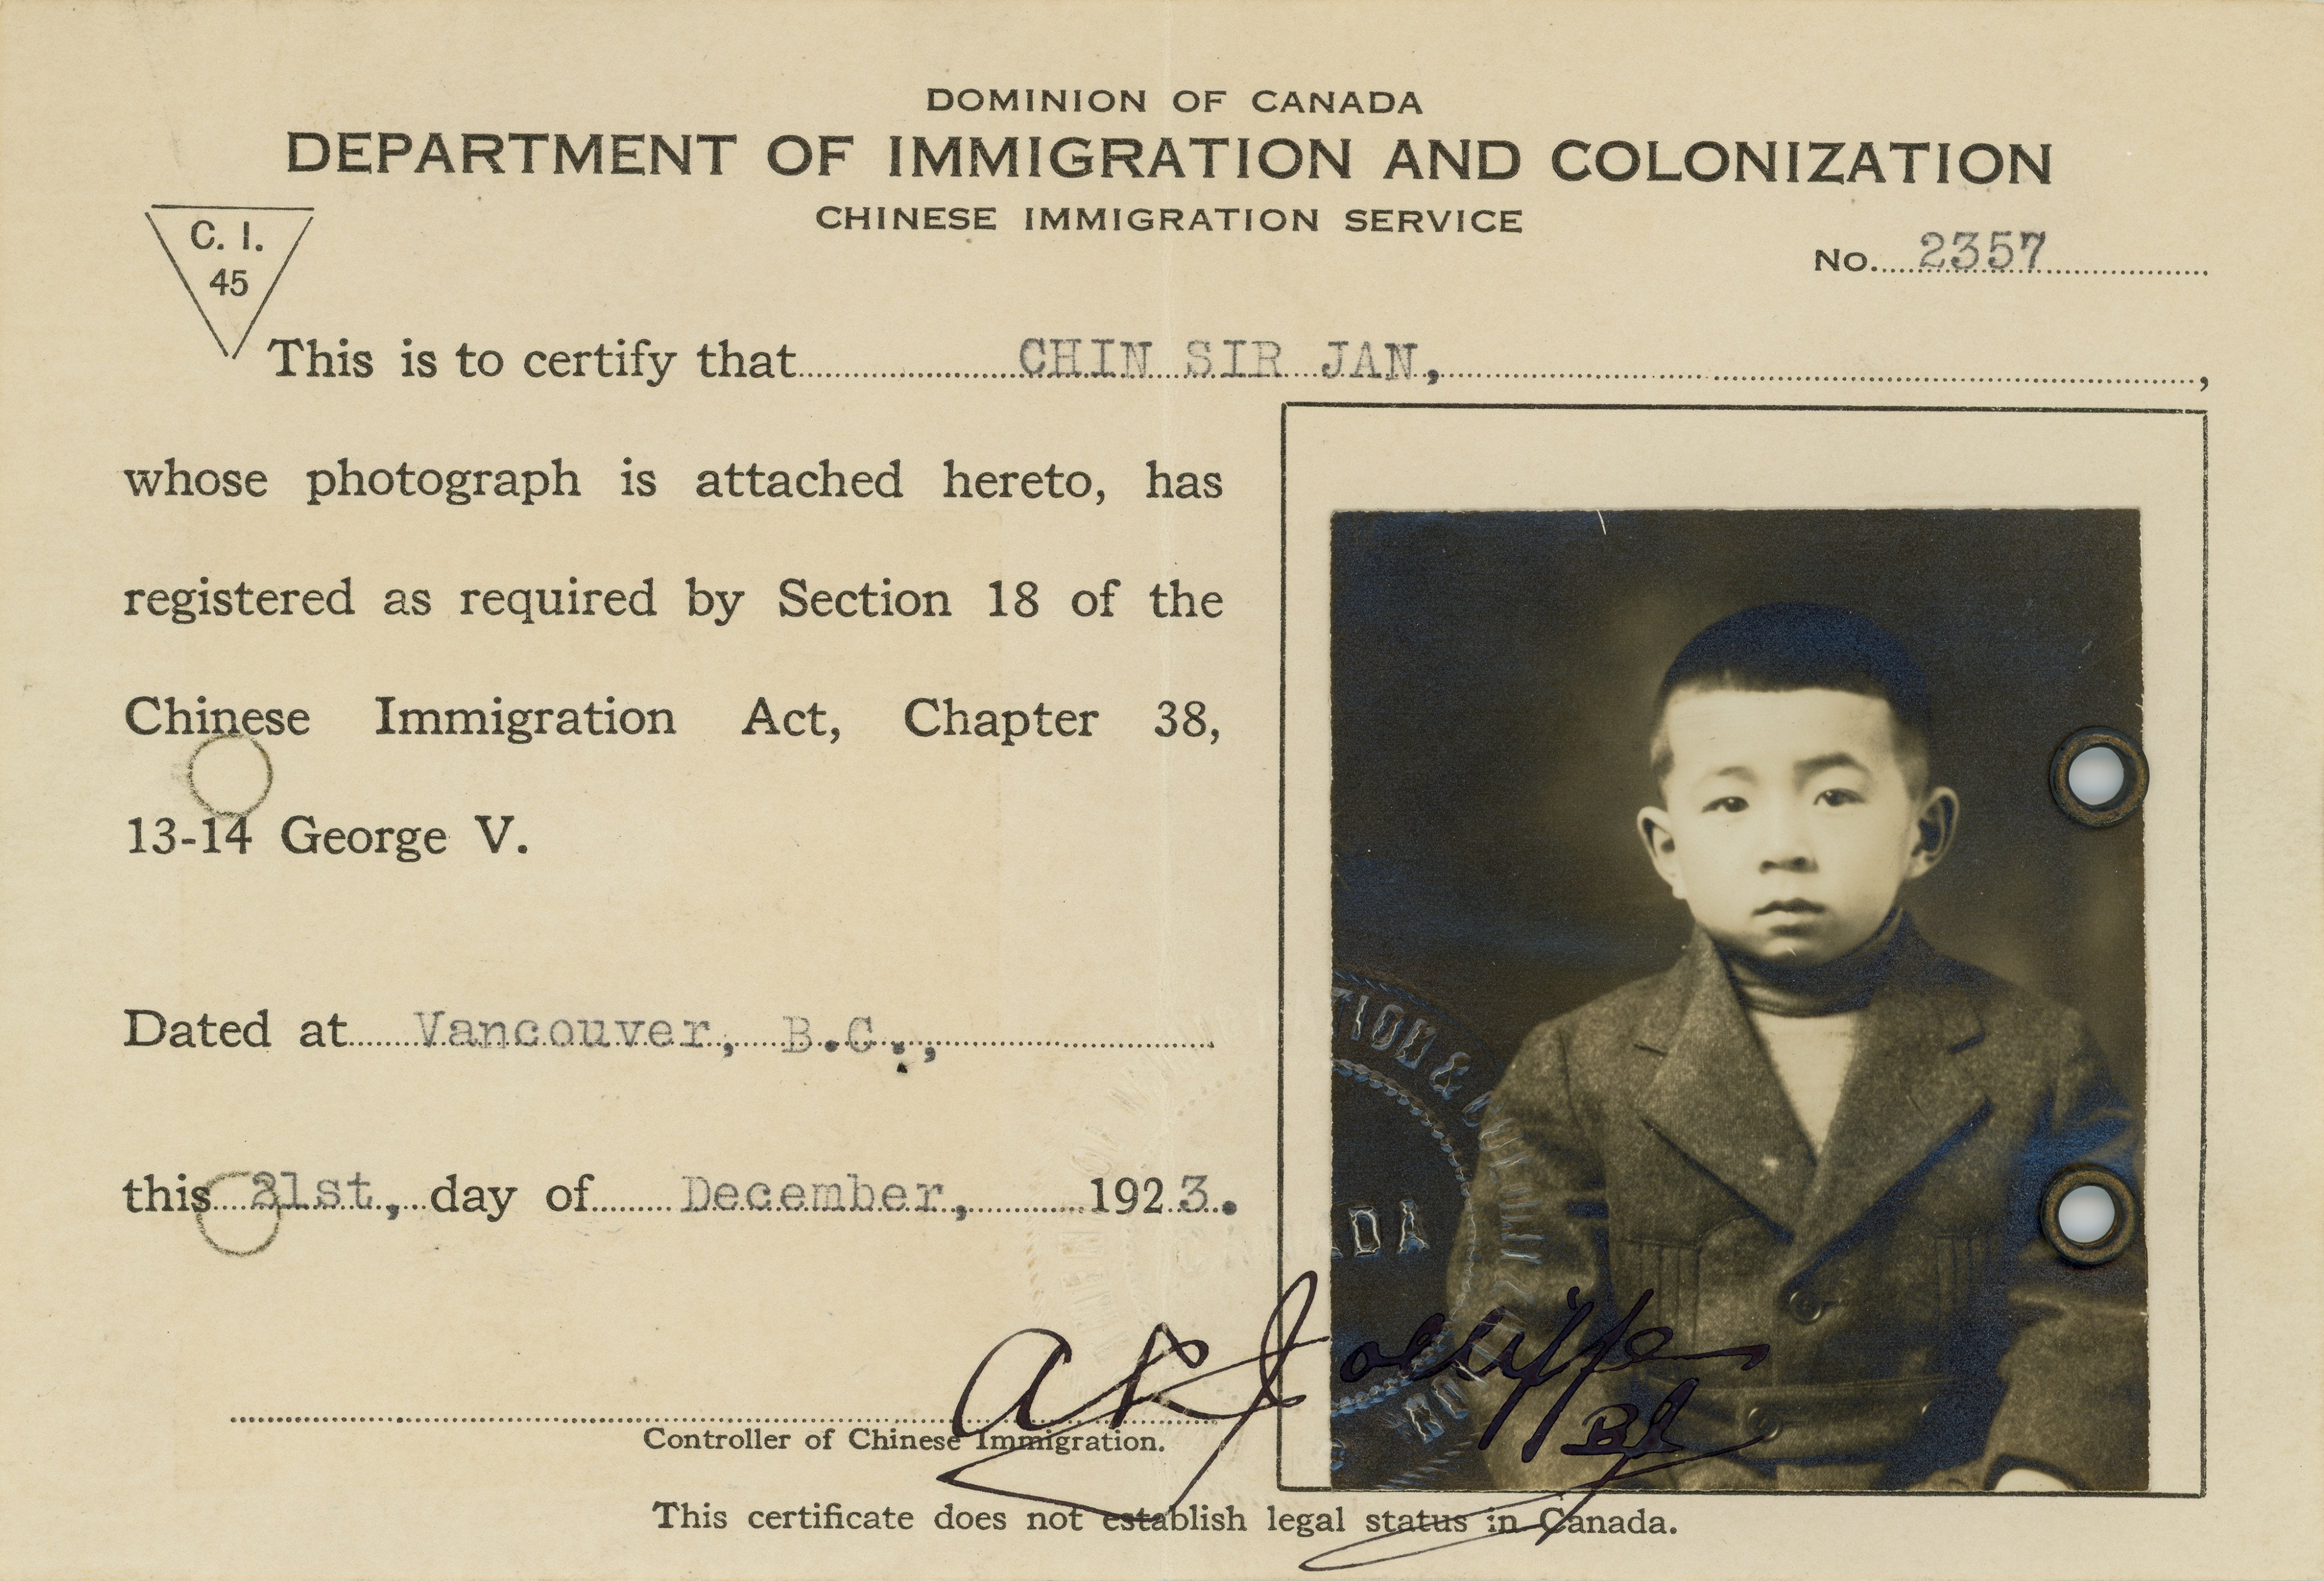 A Chinese Immigration certificate for Chin Sir Jan. The Chinese Canadian Museum in Vancouver’s “The Paper Trail to the 1923 Exclusion Act” exhibition showcases the lost and harrowing stories of Chinese immigrants who come to Canada. Photo: Chinese Canadian Museum